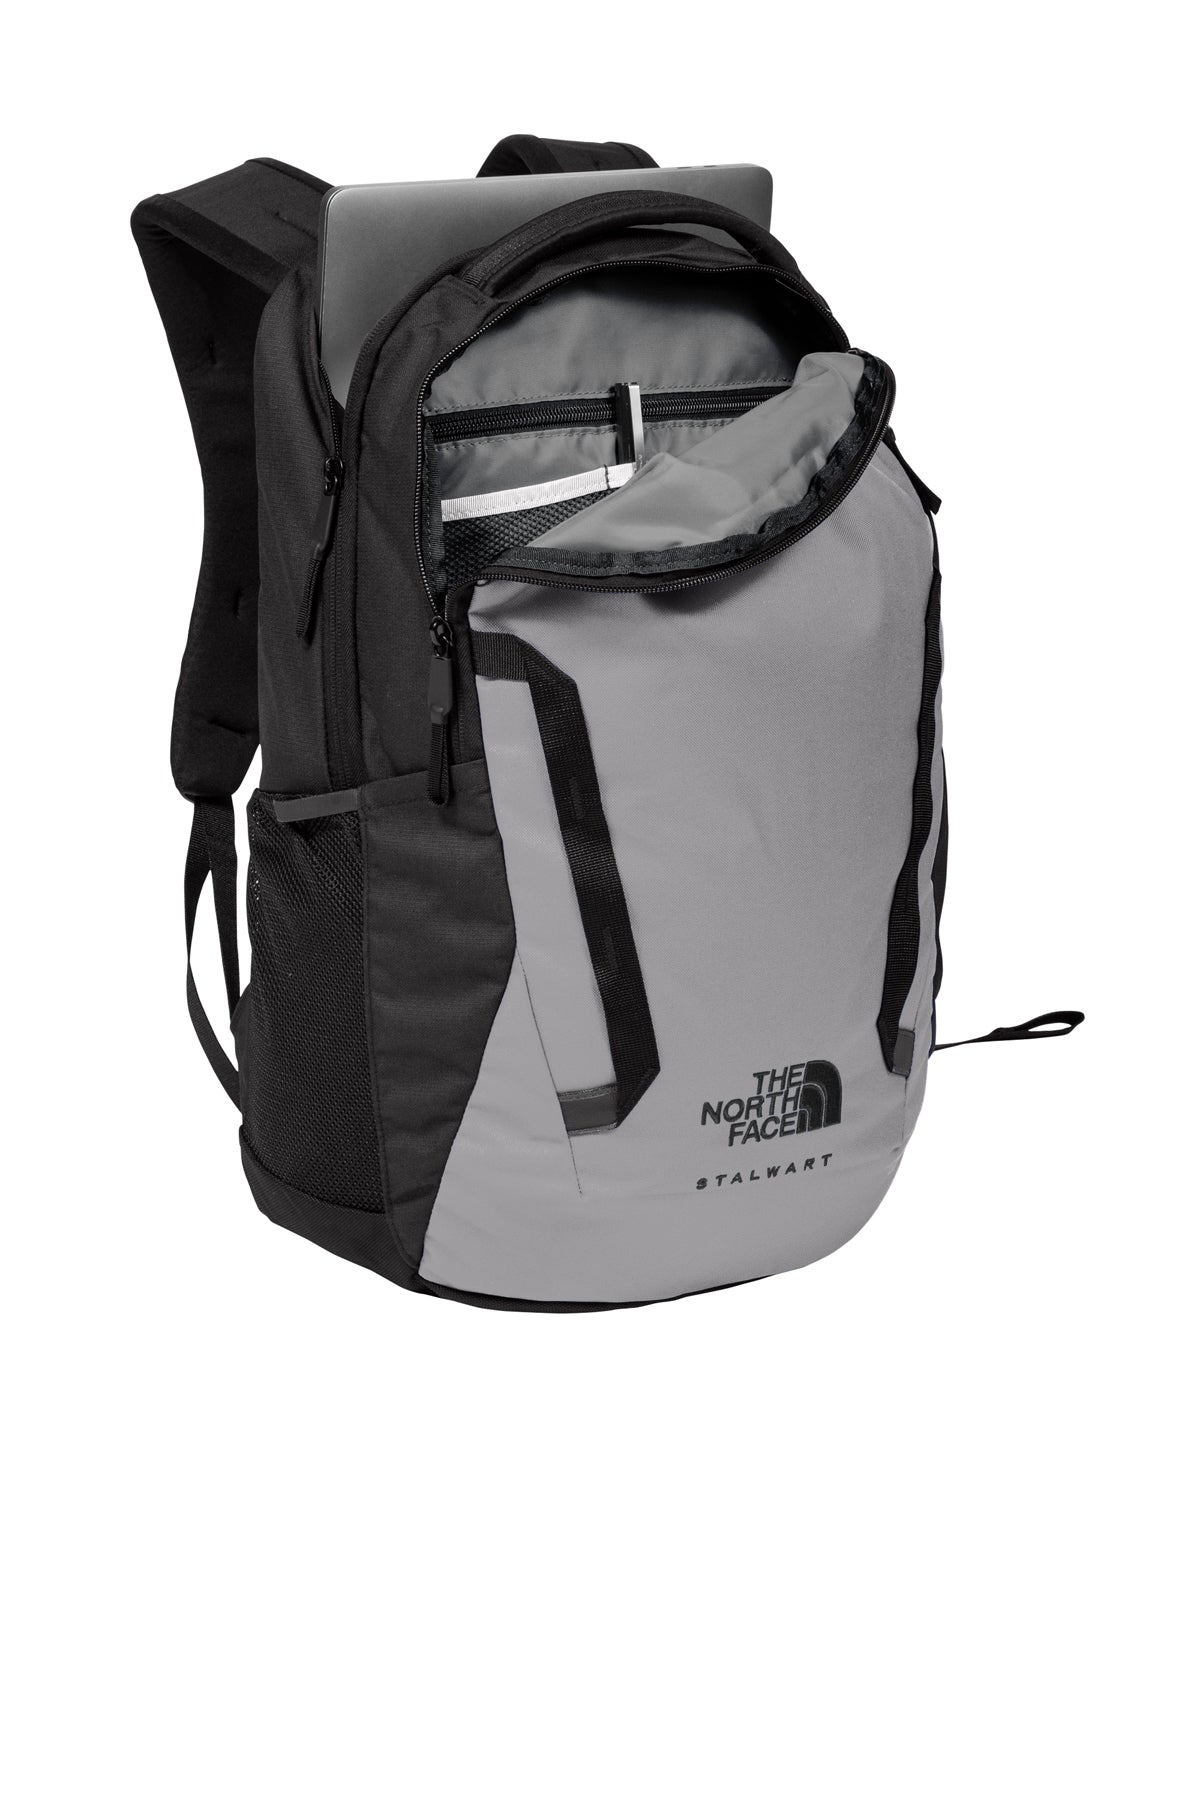 The North Face Stalwart Backpack-6